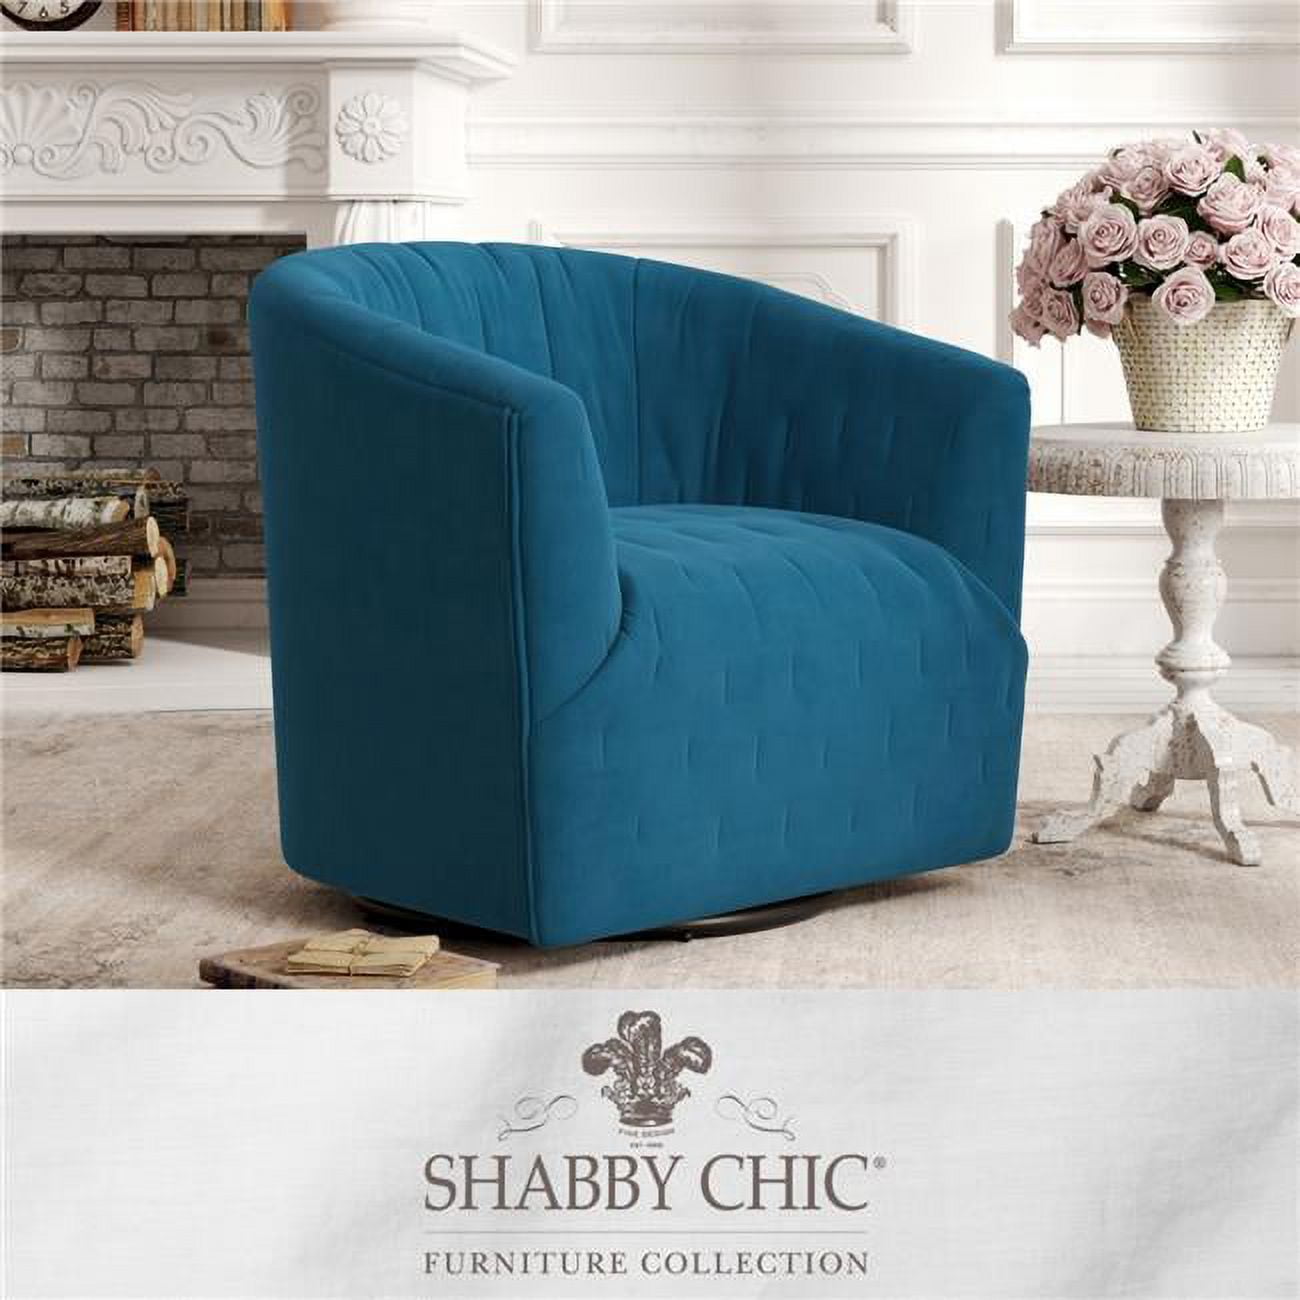 Posh Living SAC242-02SG-UE 29.5 x 31.1 x 30.7 in. Grecia Upholstered Accent  Chair, Teal Velvet